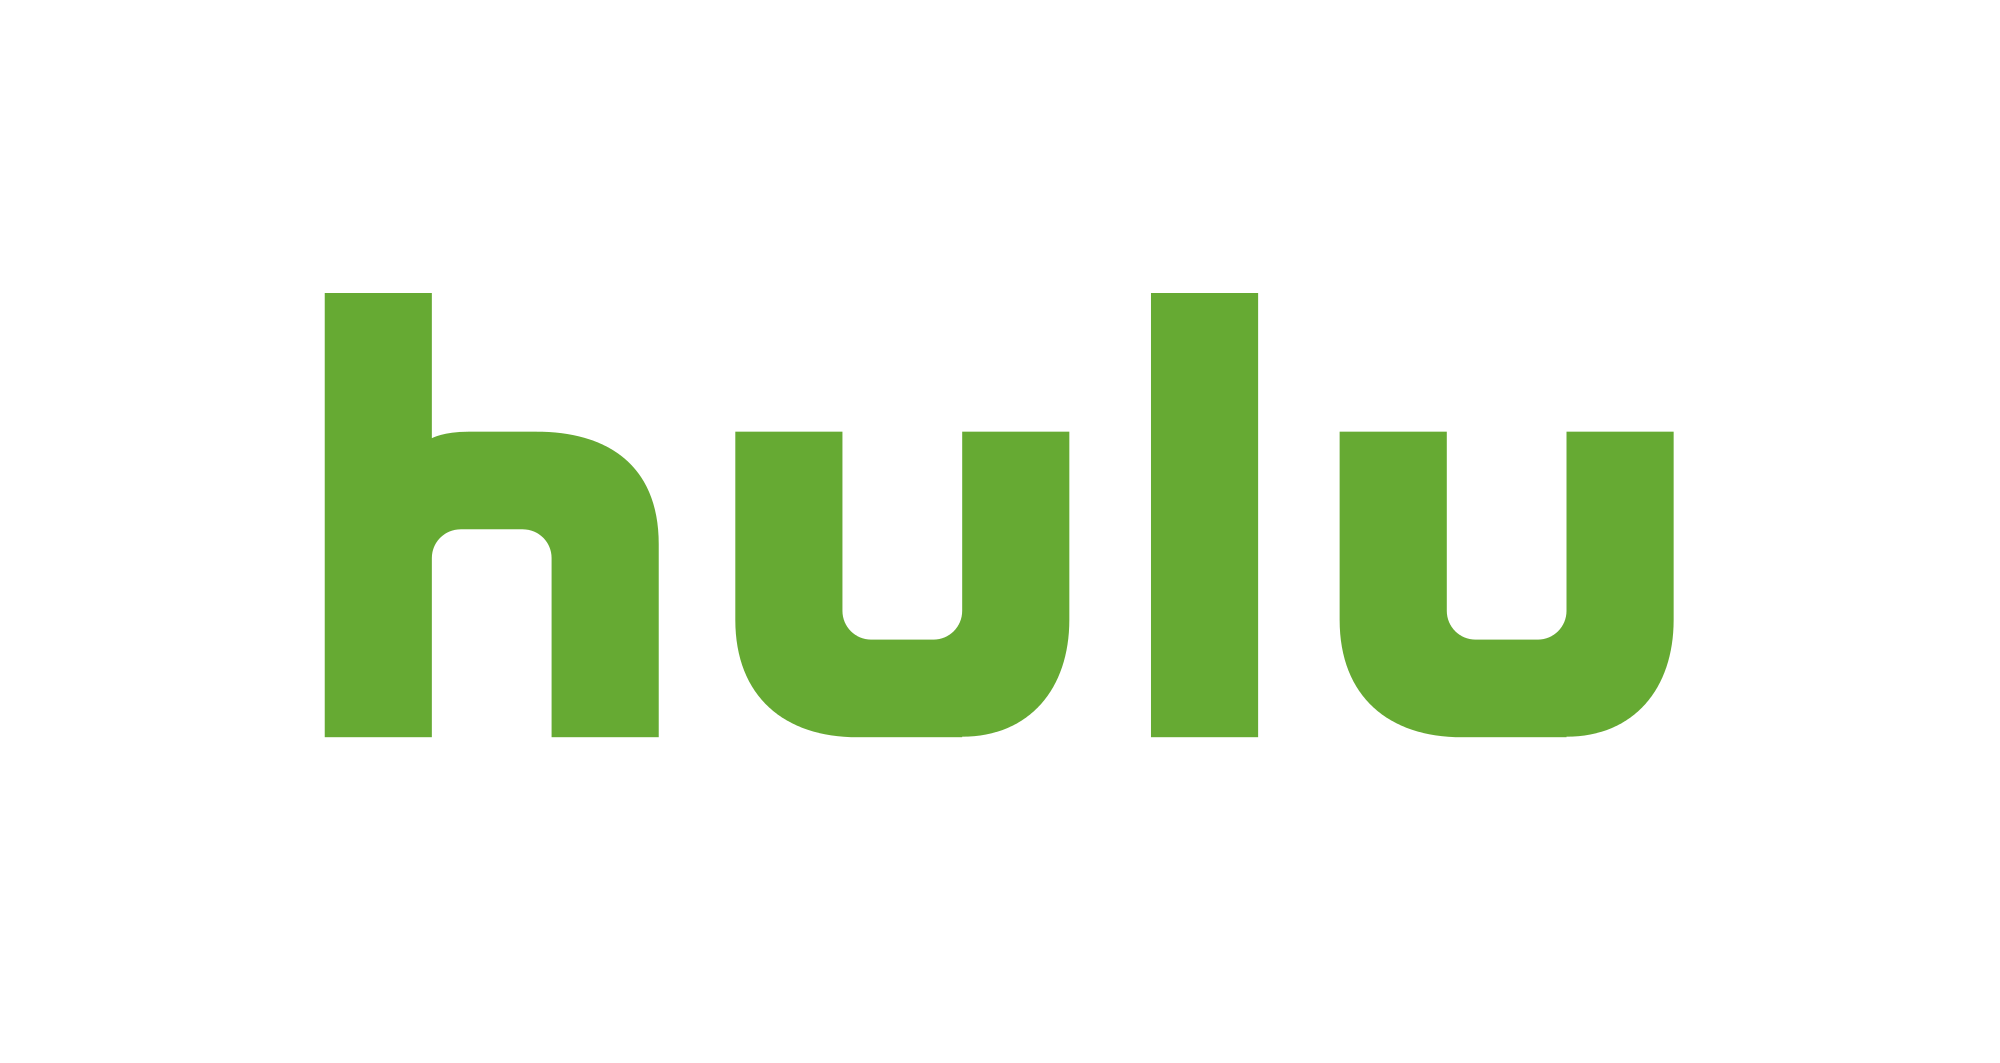 Hulu + Live TV Price Hike Comes With Advice To Switch To Cheaper